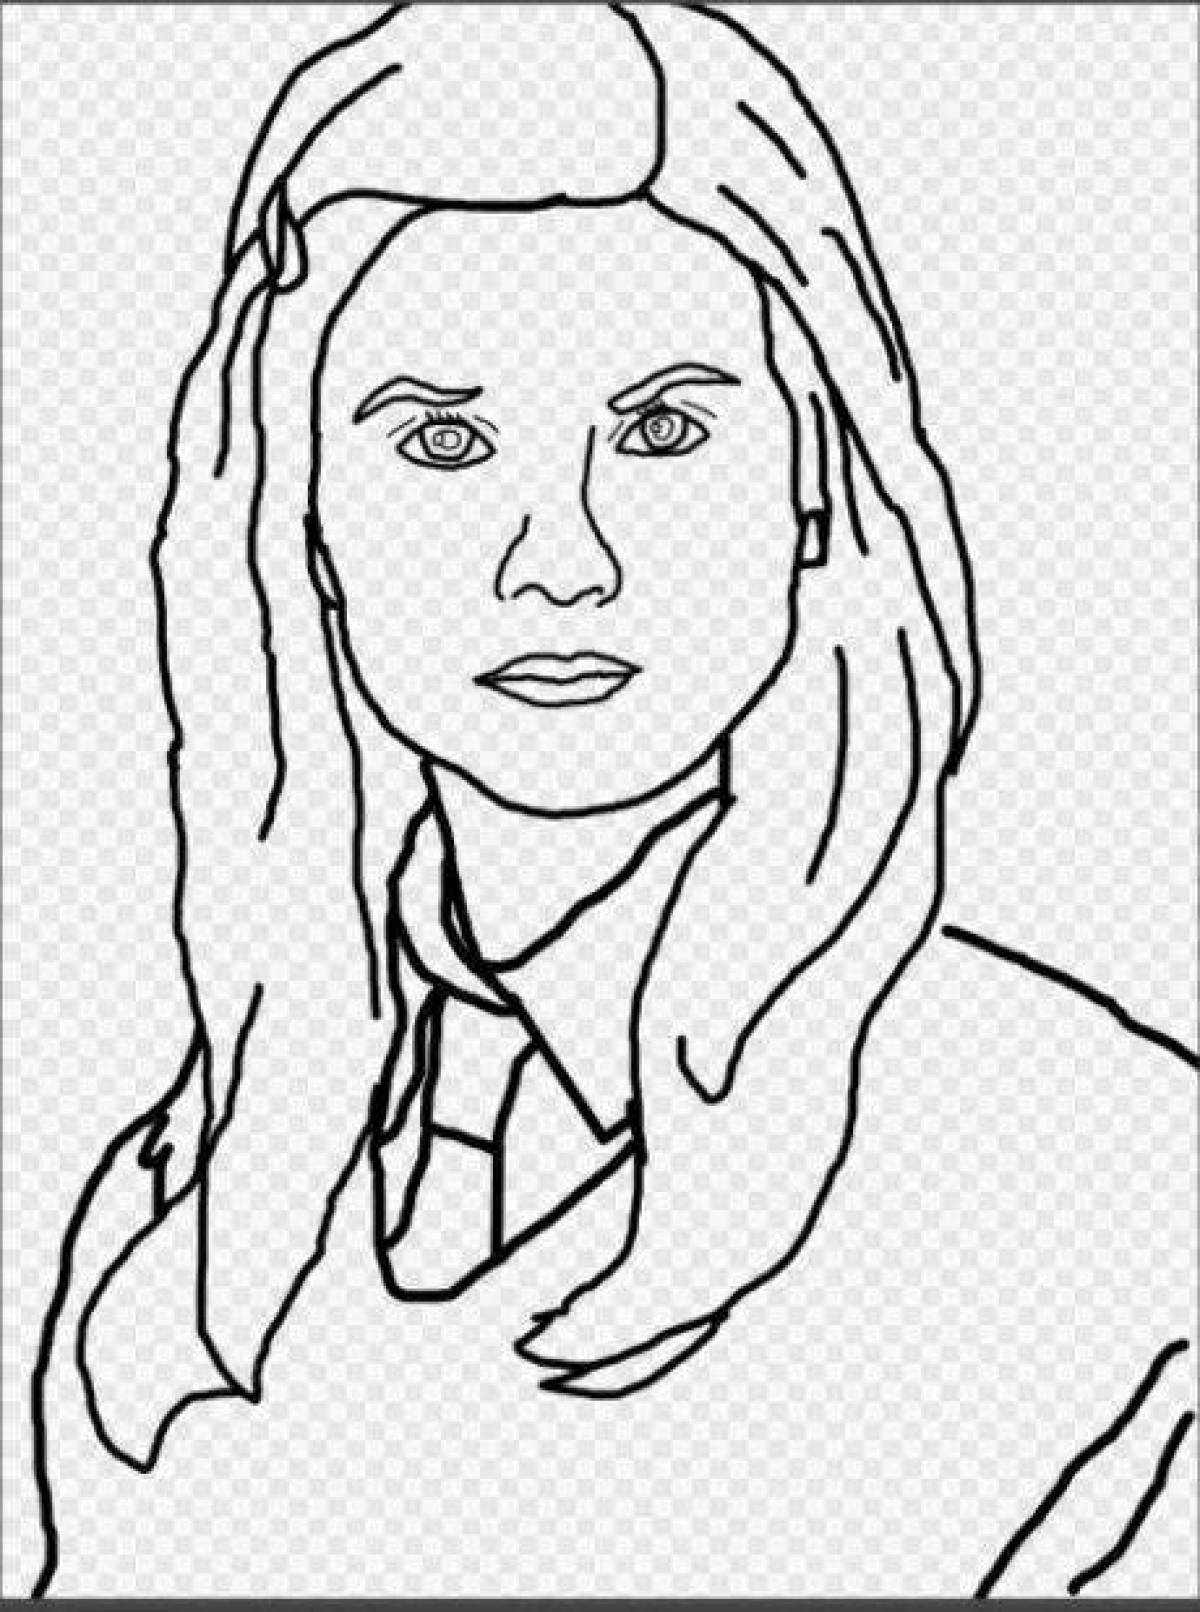 Coloring fairy ginny weasley